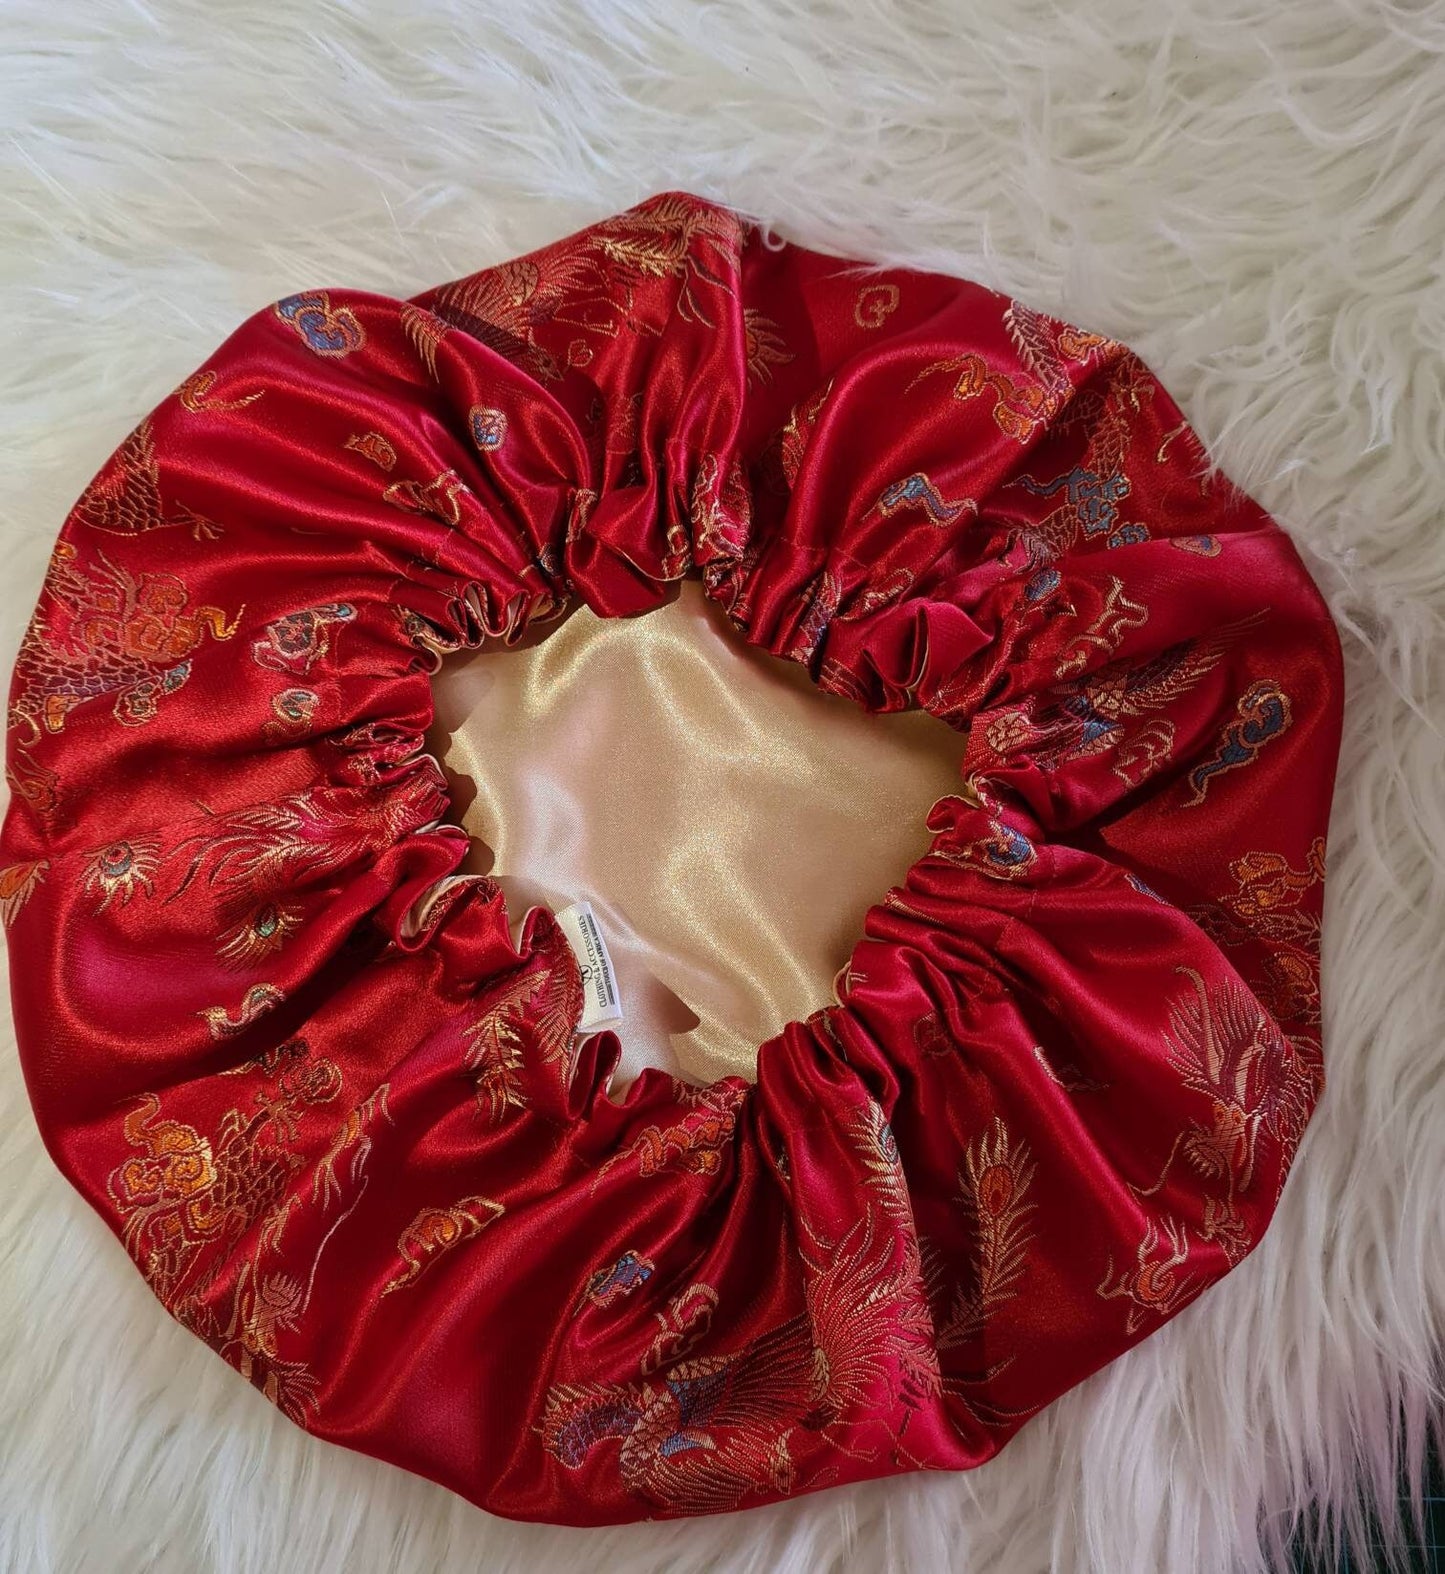 Red Chinese Print Satin Bonnet| Limited Edition